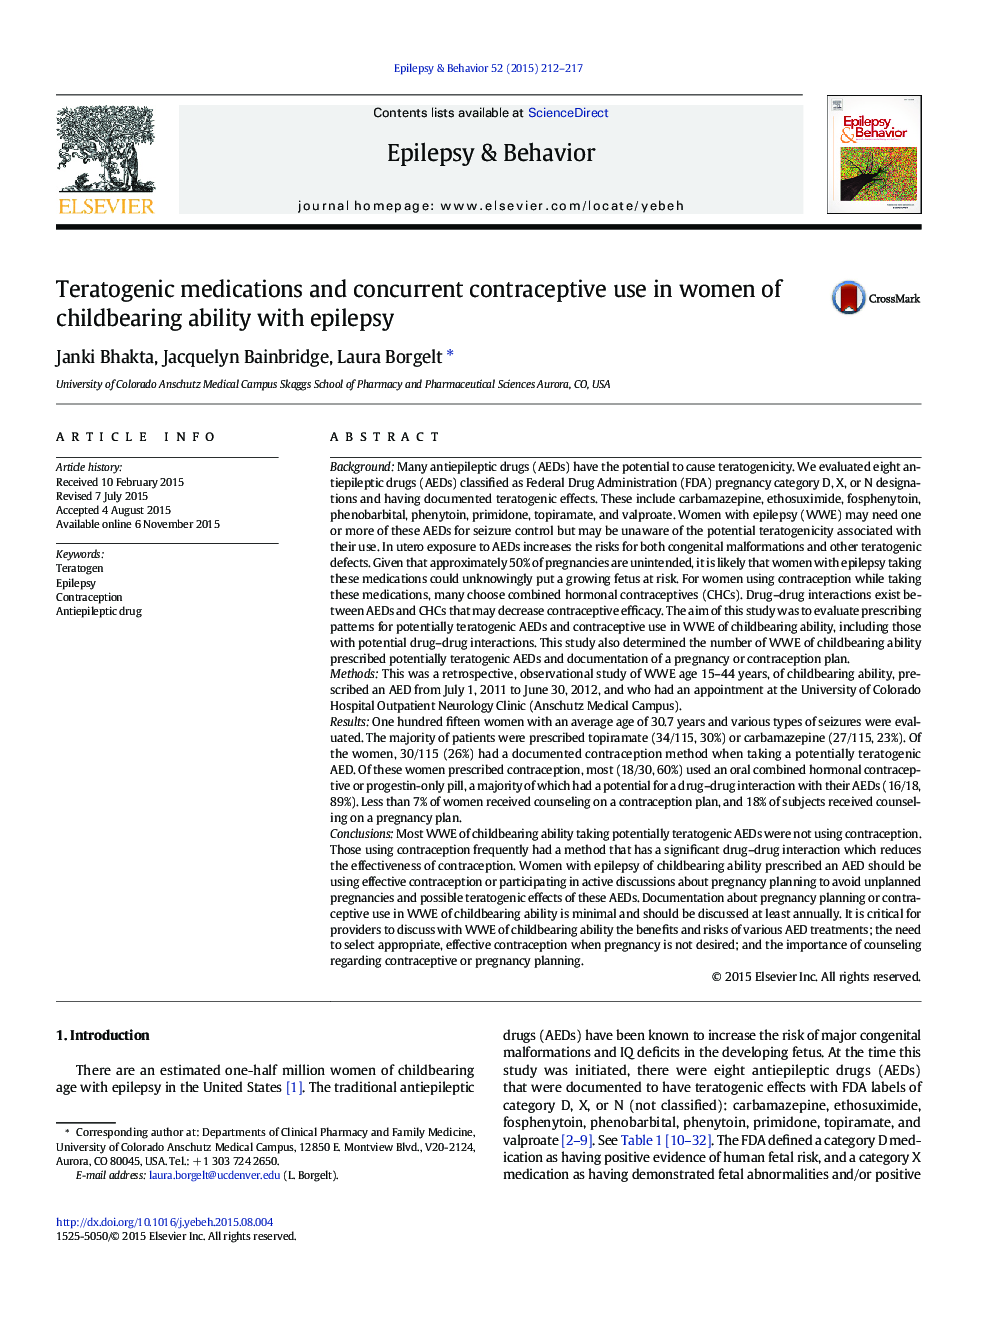 Teratogenic medications and concurrent contraceptive use in women of childbearing ability with epilepsy